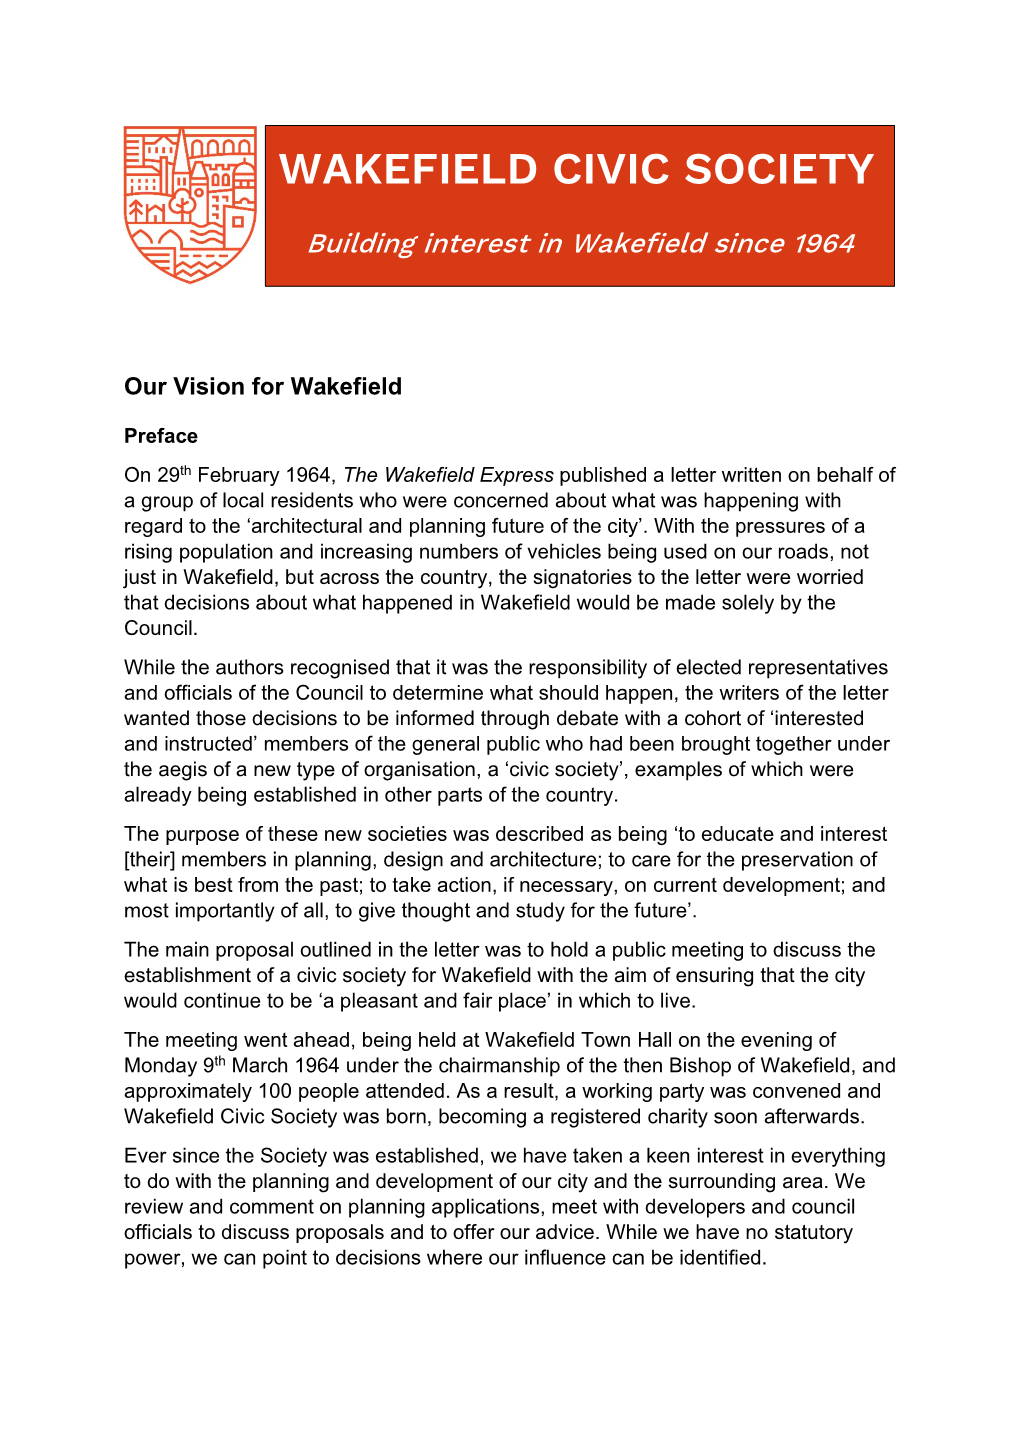 Our Vision for Wakefield